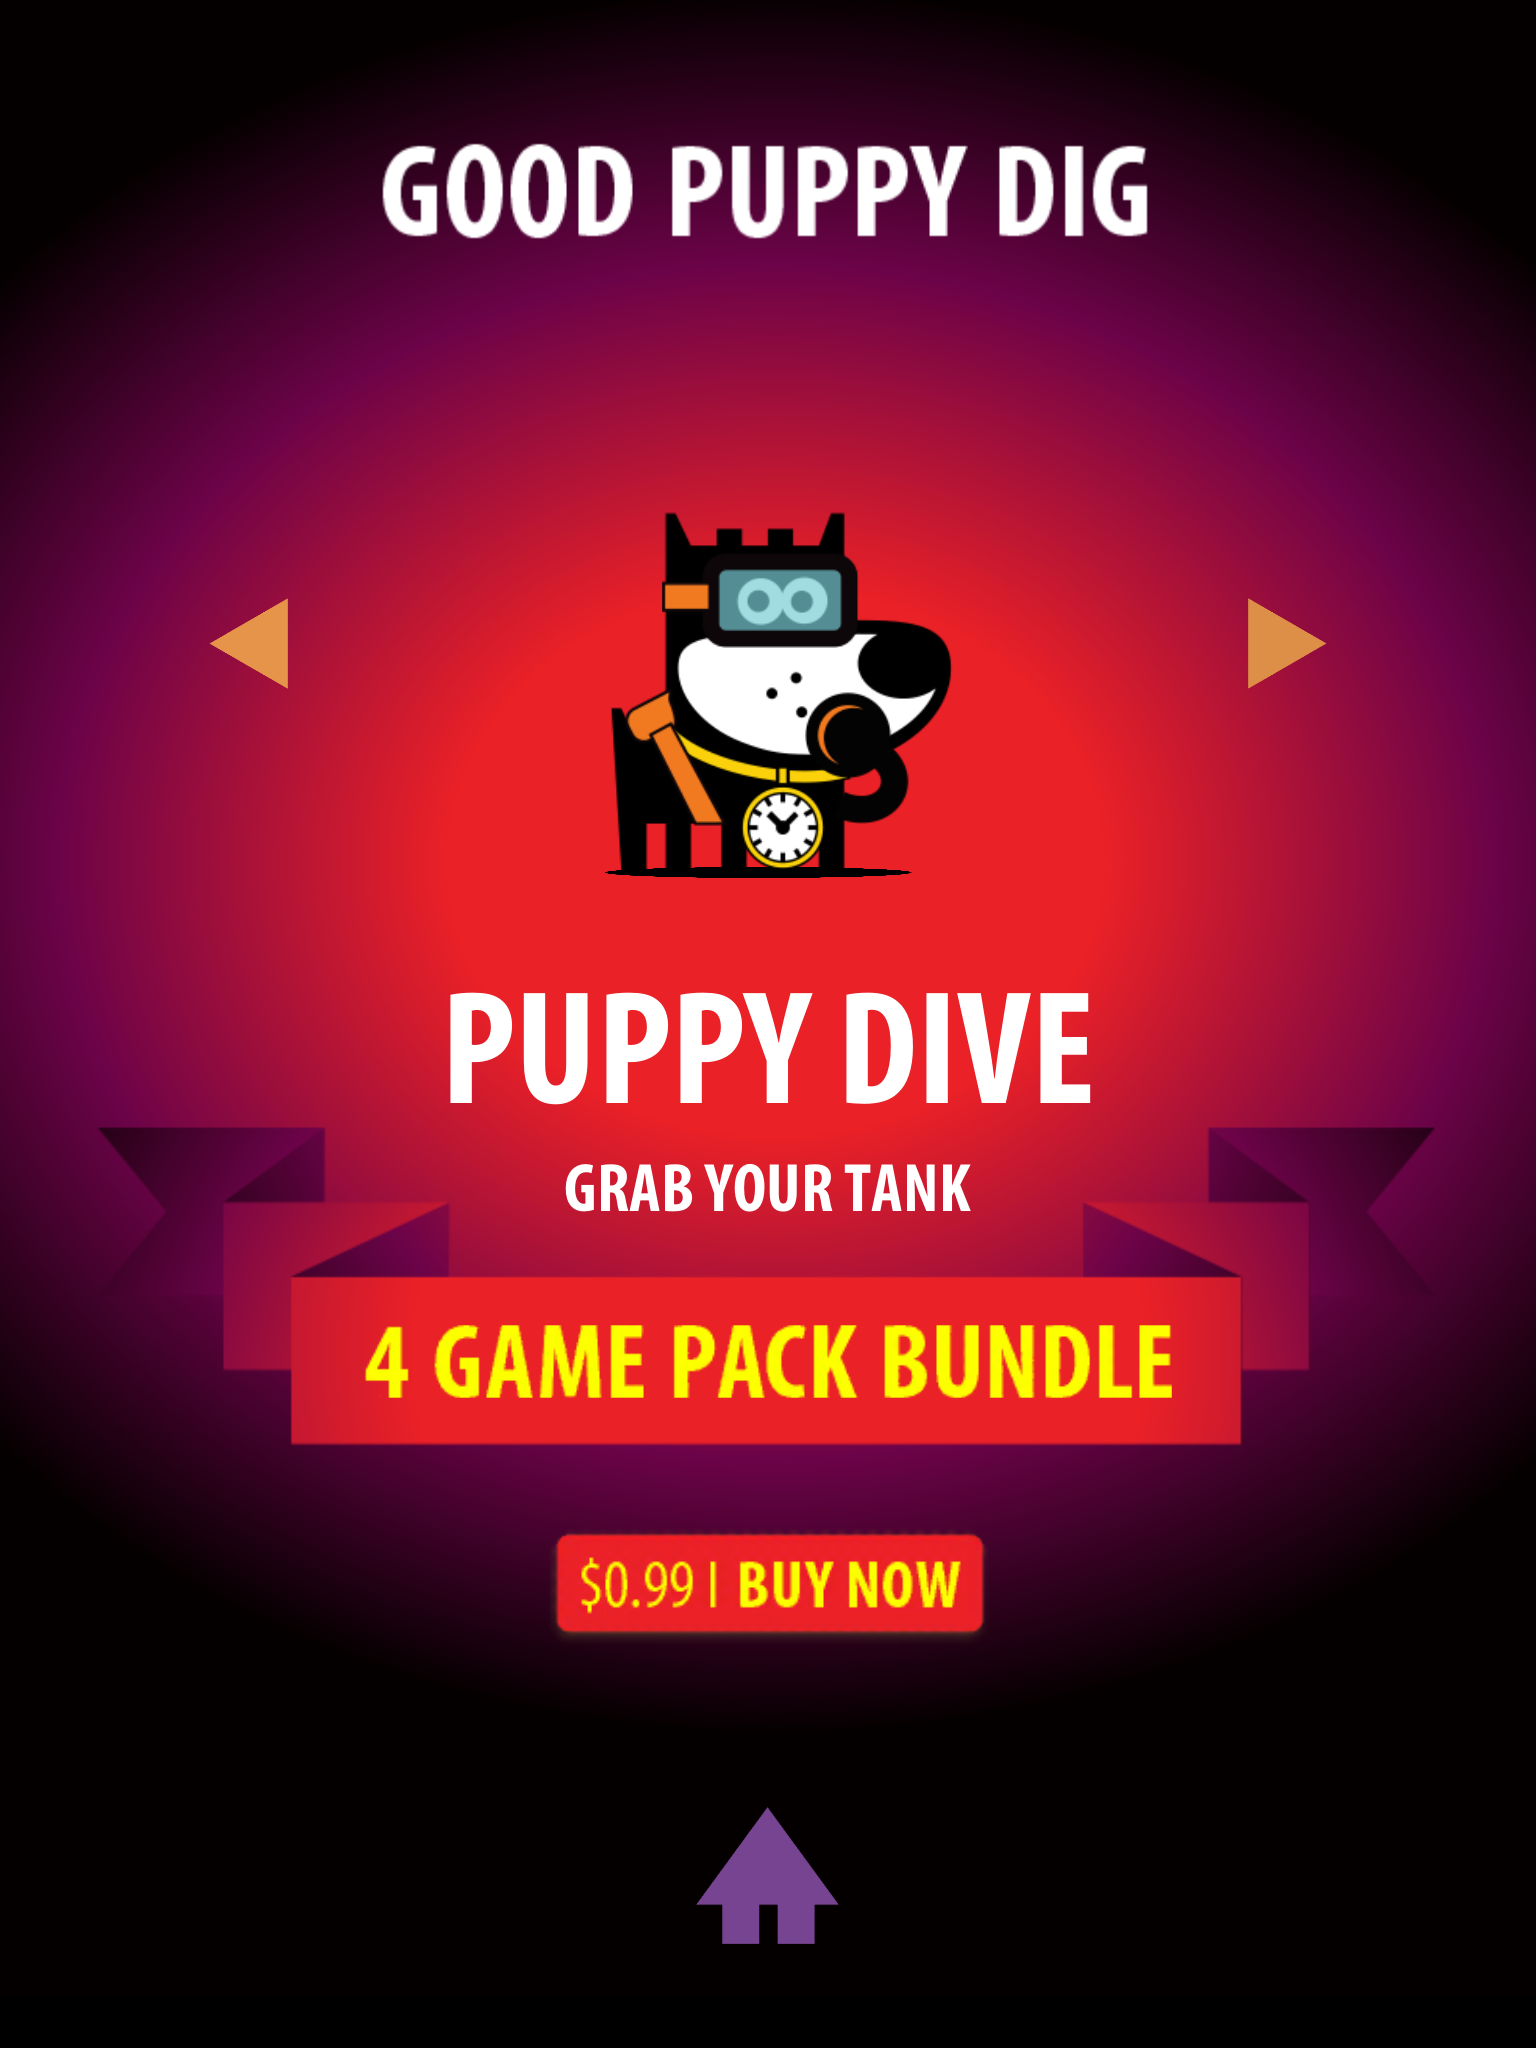 GOOD-PUPPY-DIG-Infinite-Runner-Fast-Retro-Arcade-Game-8.png